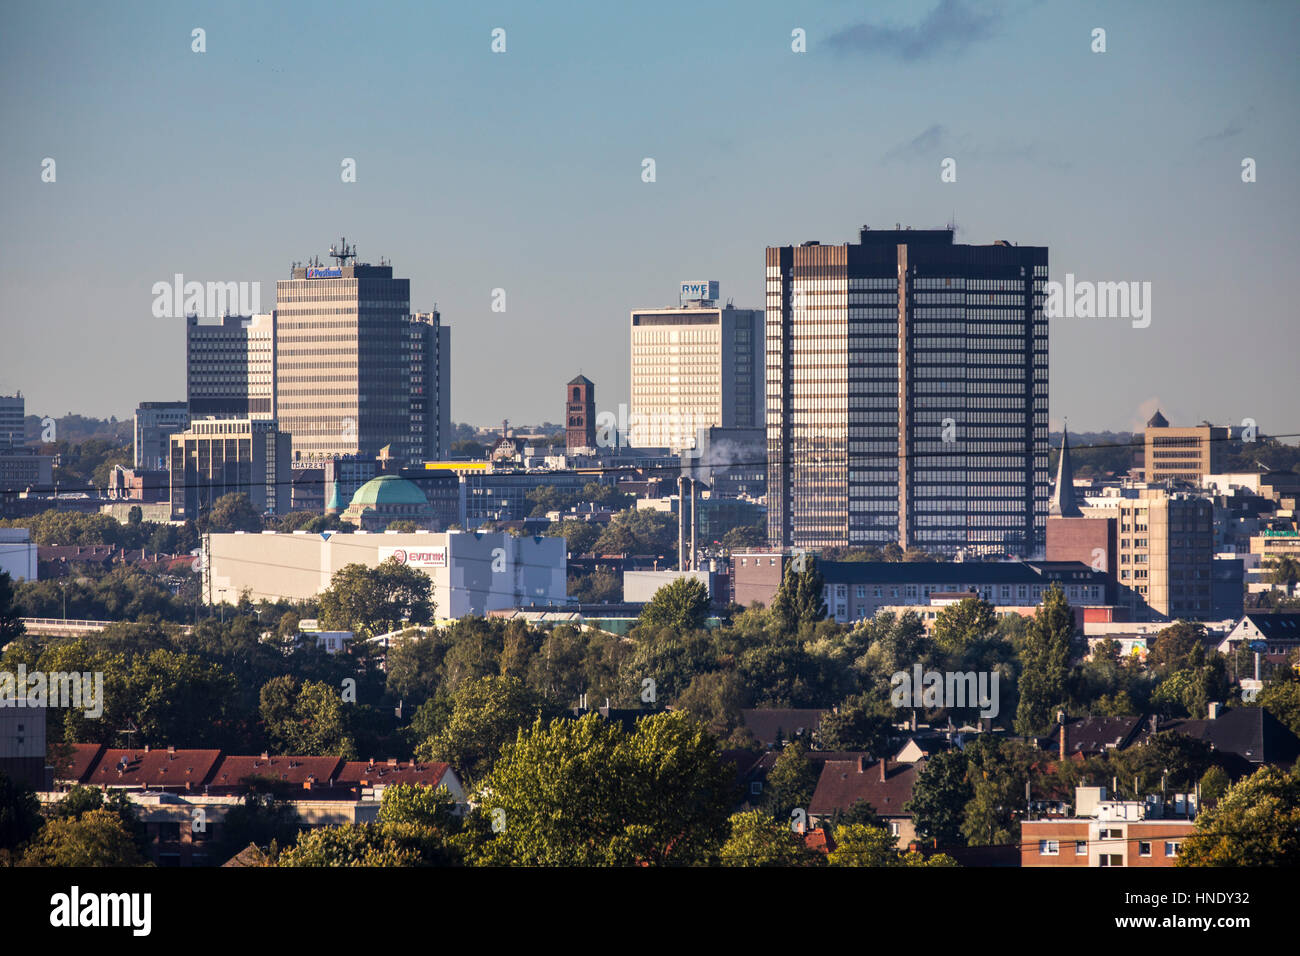 Panorama of the city center of Essen, Germany, Skyline,  right the town hall, Stock Photo